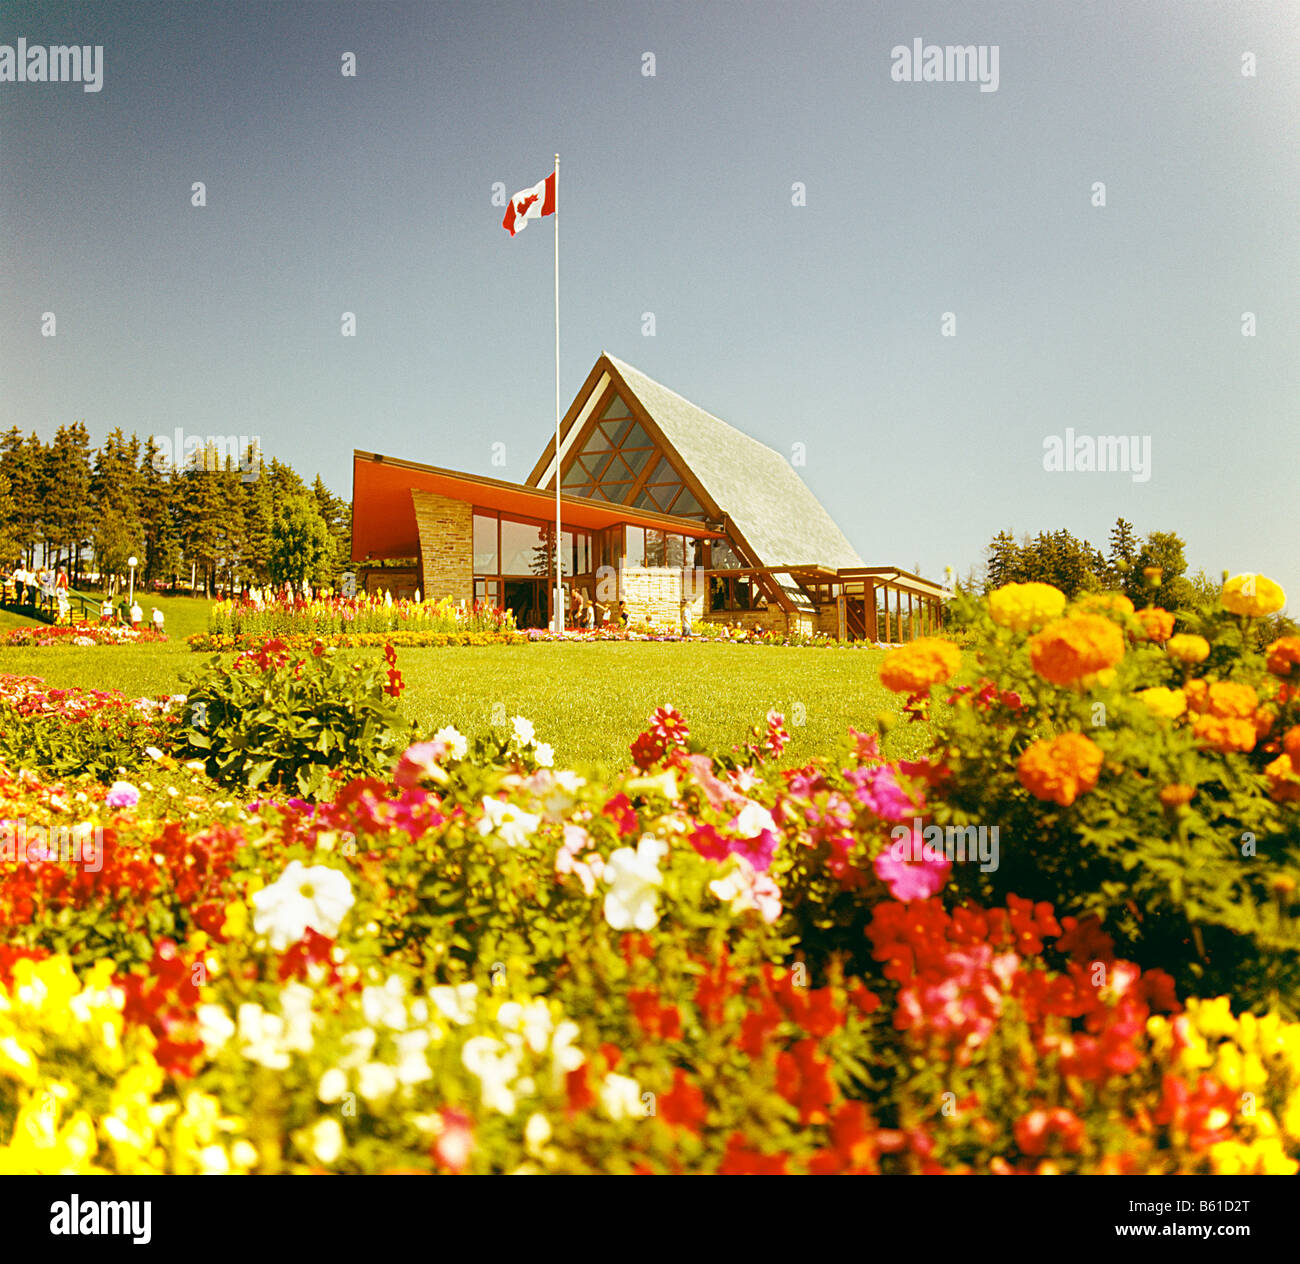 Alexander Graham Bell Museum in Cap Breton Nova Scotia,Canada with flower bed with Canadian flag and house in background Stock Photo